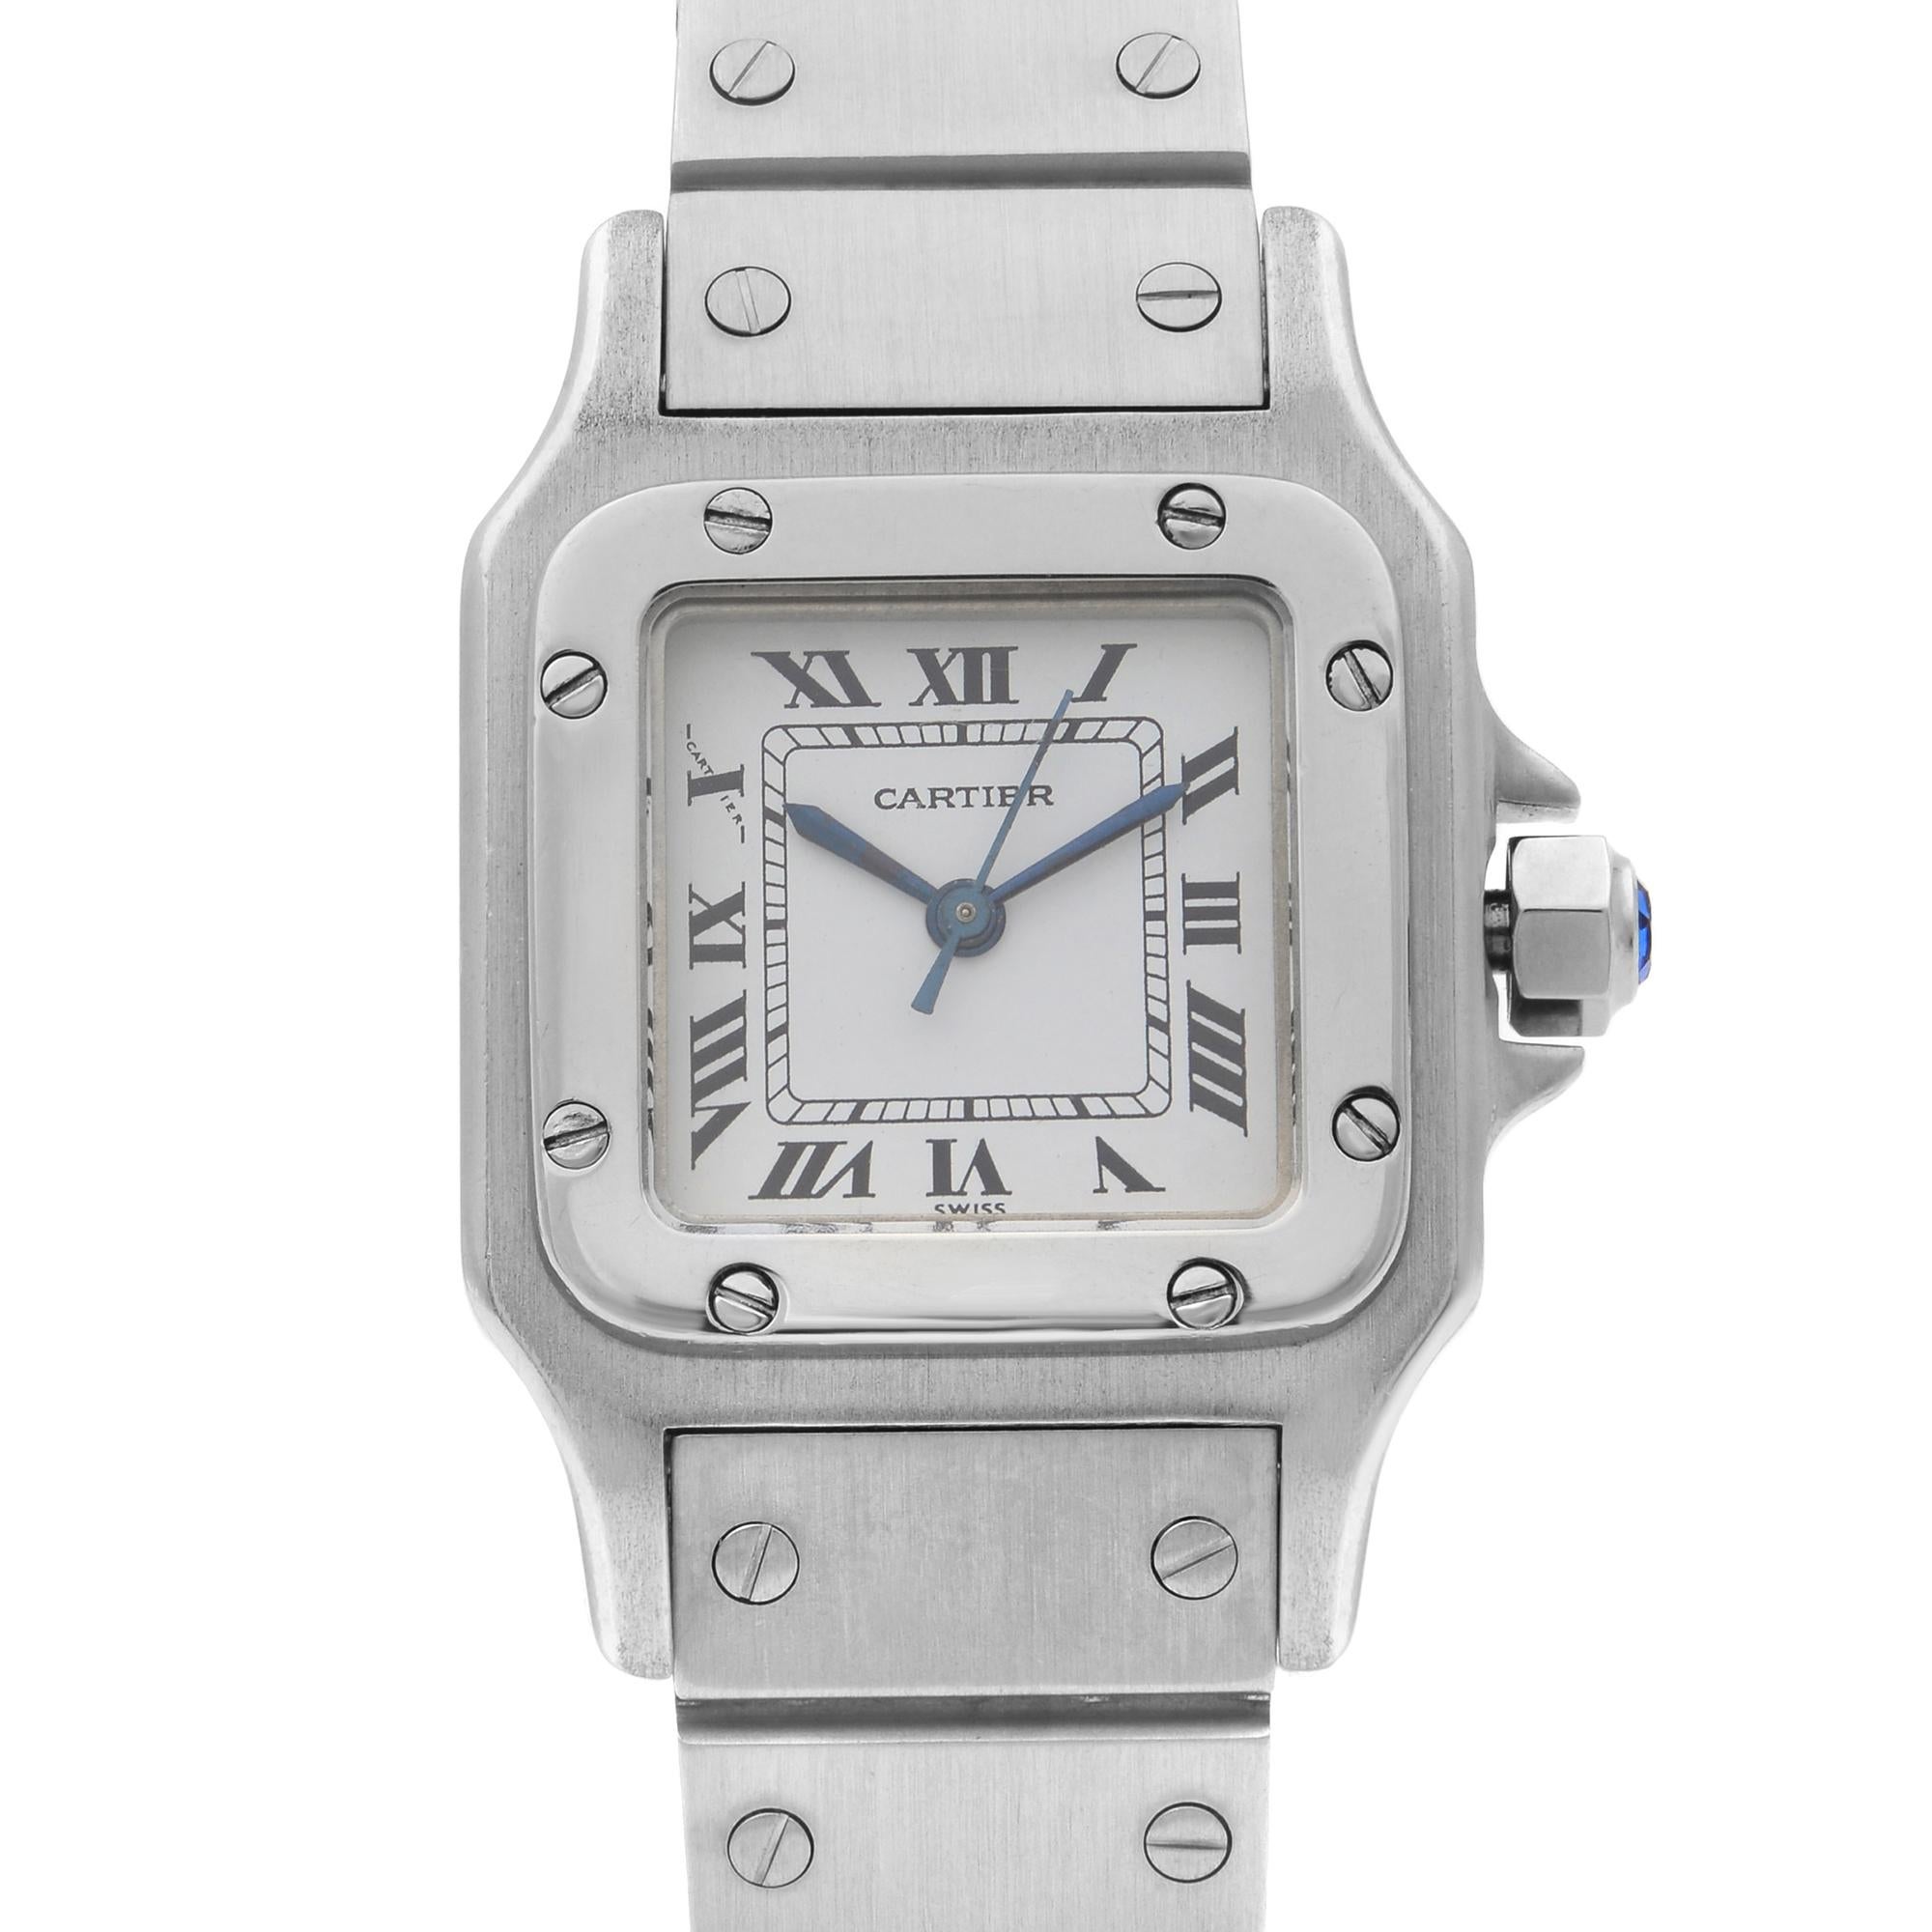 Pre Owned Cartier Santos Galbee 24MM Steel White Dial Automatic Ladies Watch Great Condition. This Timepiece Features: Stainless Steel Case And Bracelet Fixed Stainless Steel Bezel with 8 Screws. White Dial With Blue Steel Sword Shape Hands and